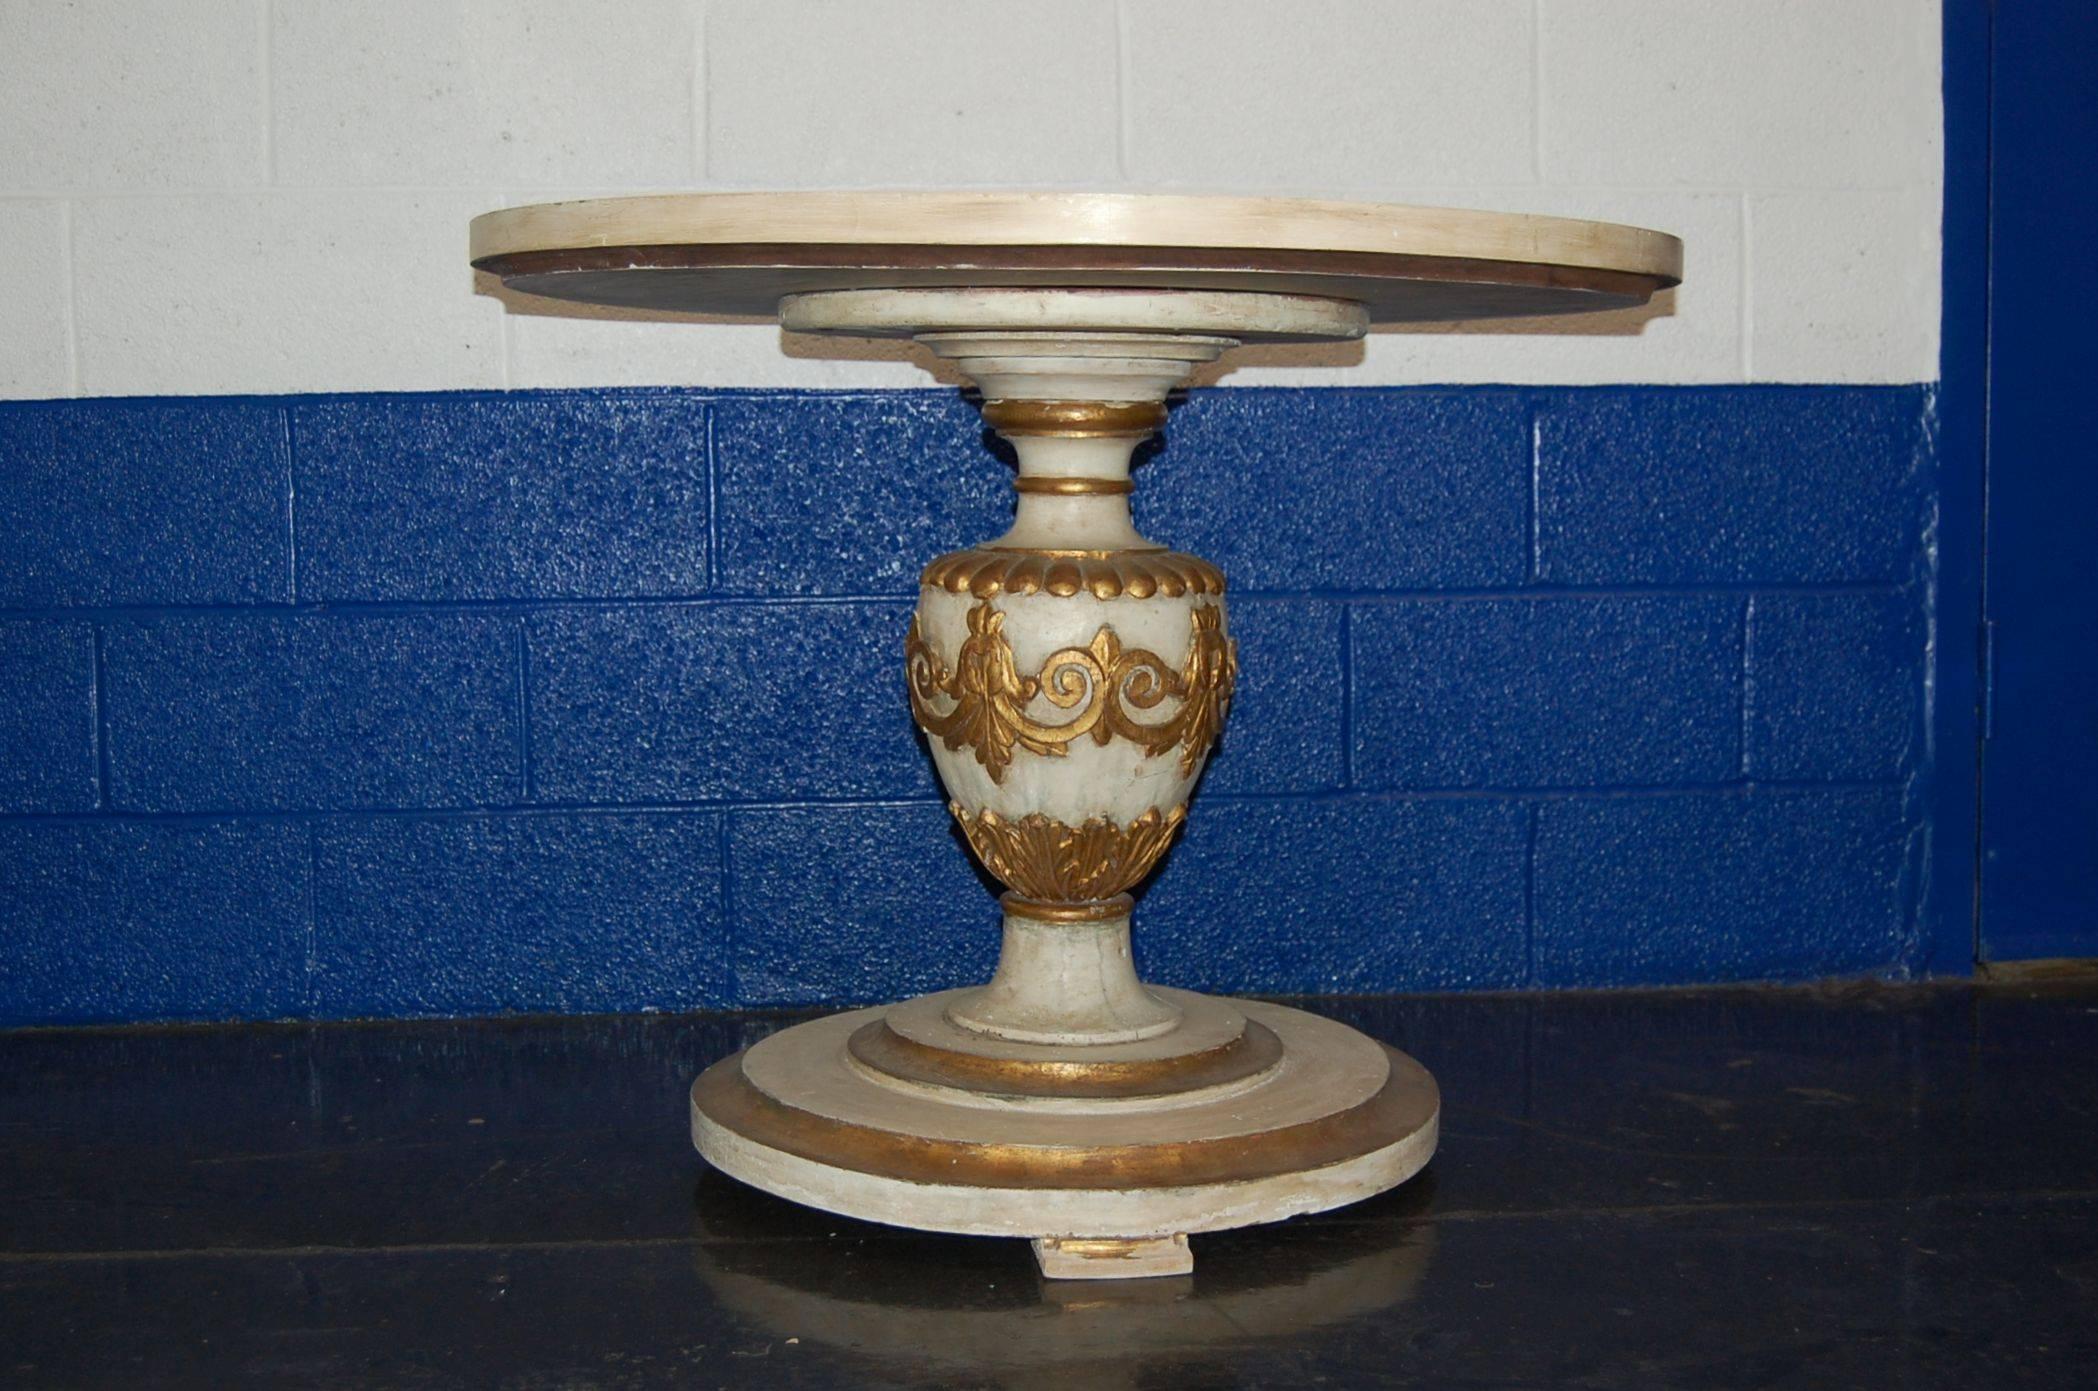 Neoclassical Mid-20th Century Painted Italian Table with Carved Urn Column and Gold Accents For Sale